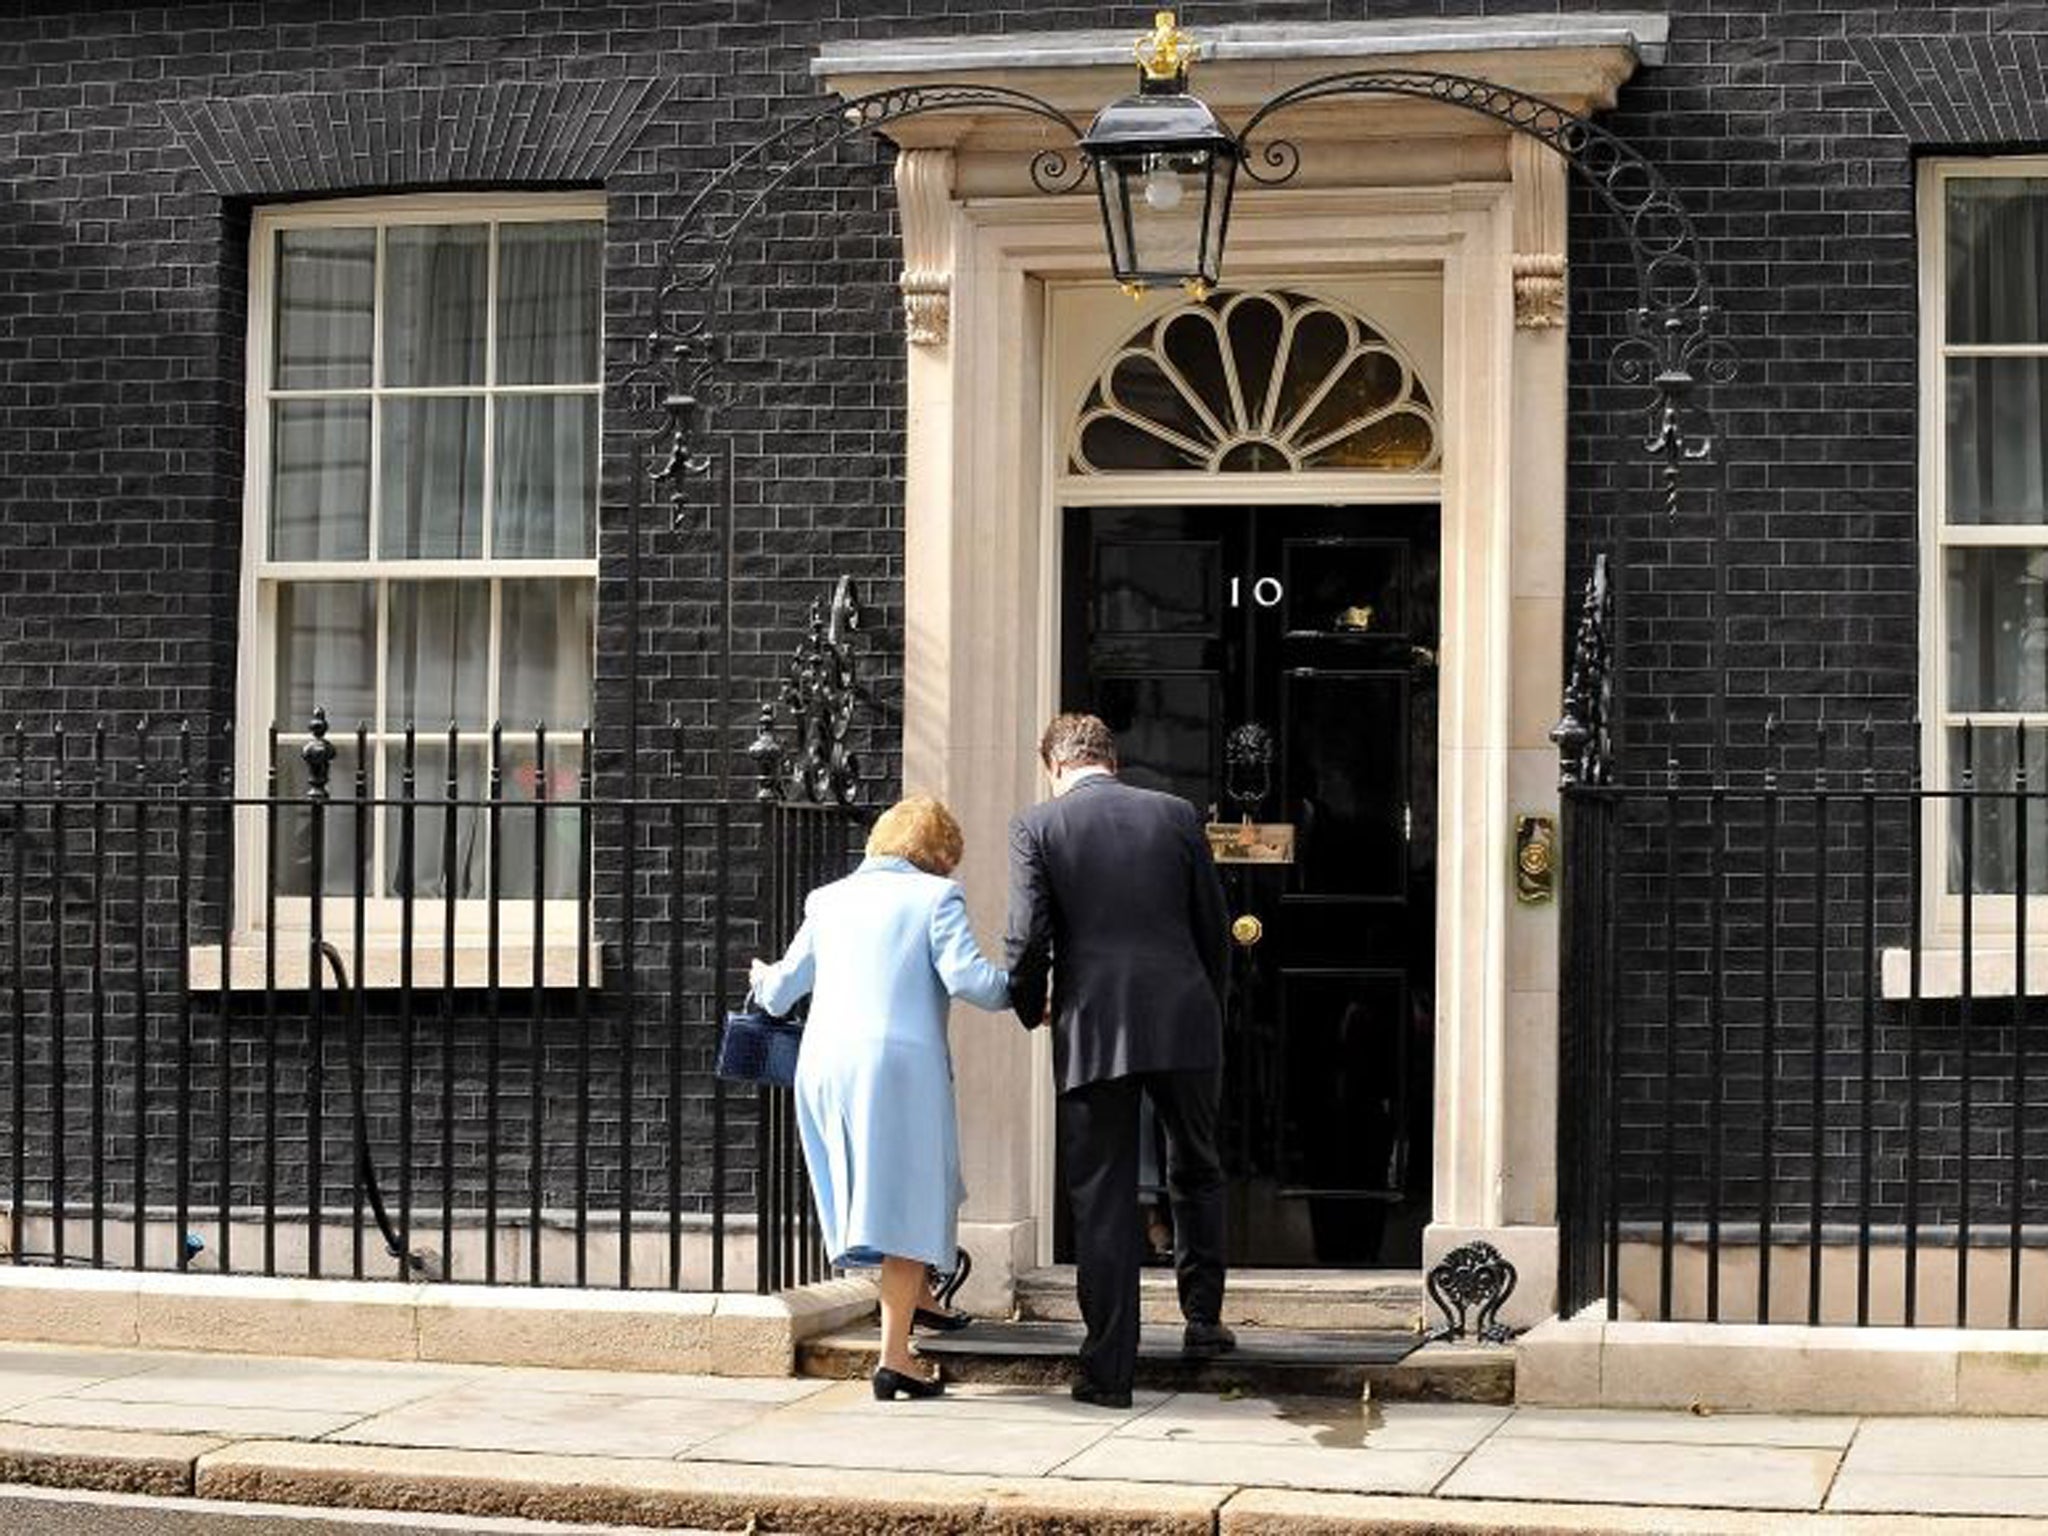 June 2010: Prime Minister David Cameron helps Baroness Thatcher into 10 Downing Street